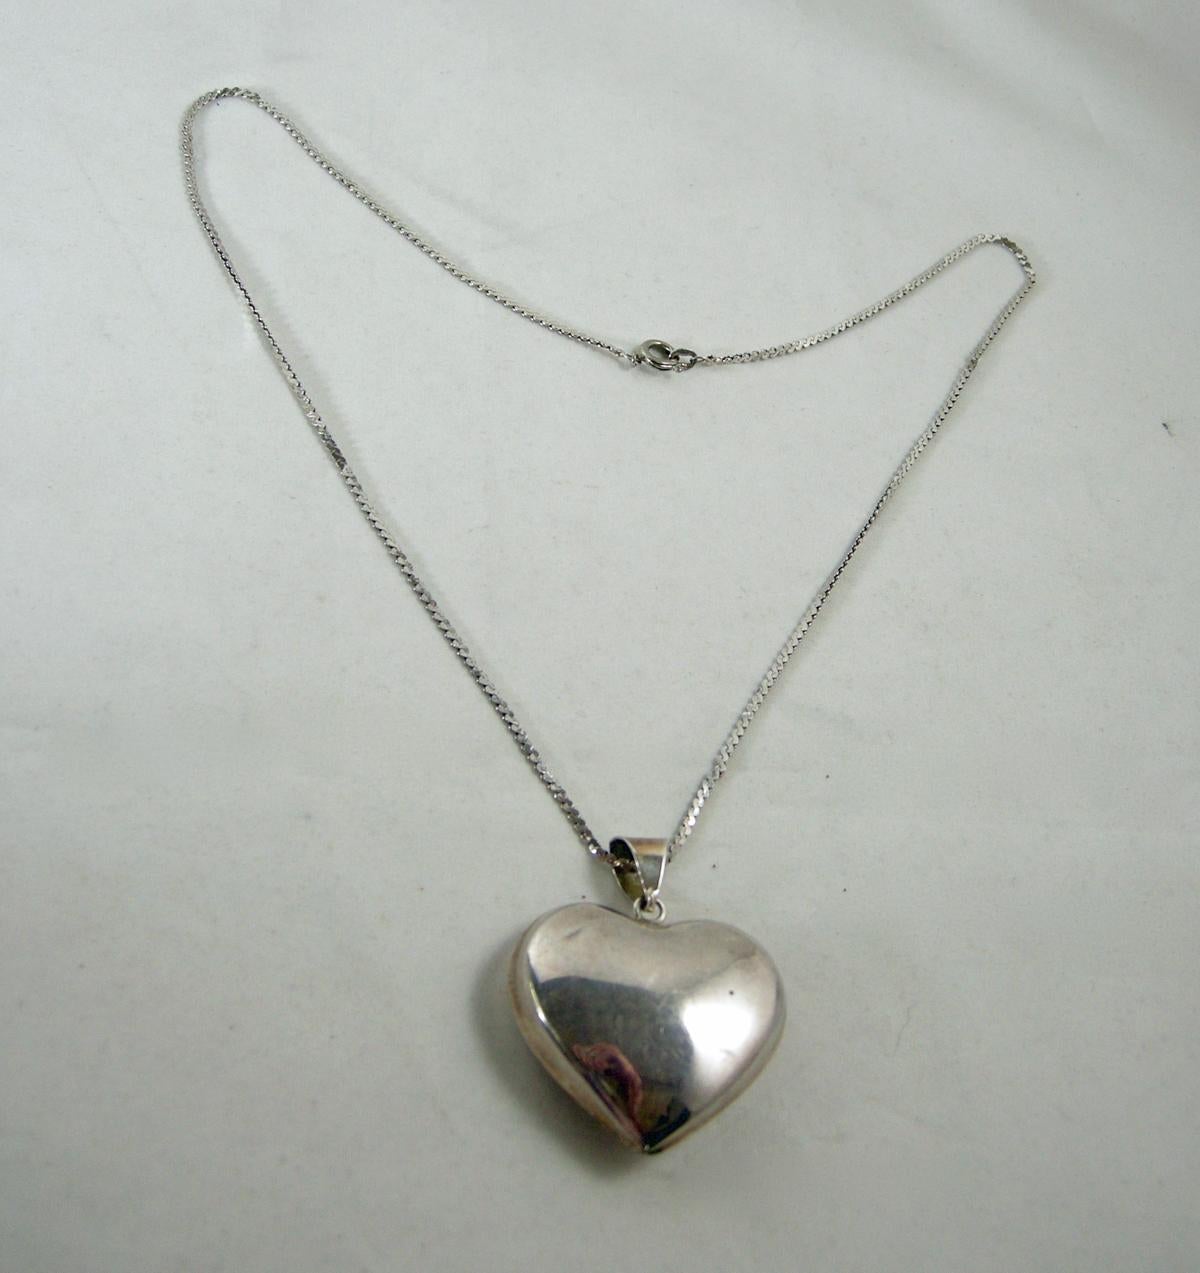 This vintage 1950’s sterling silver heart pendant heart is connected to a sterling S-link chain.  In excellent condition, the heart pendant measures 1-7/8” x 1-1/2”. The S-link chain is 20” x 1/16” with a spring clasp.